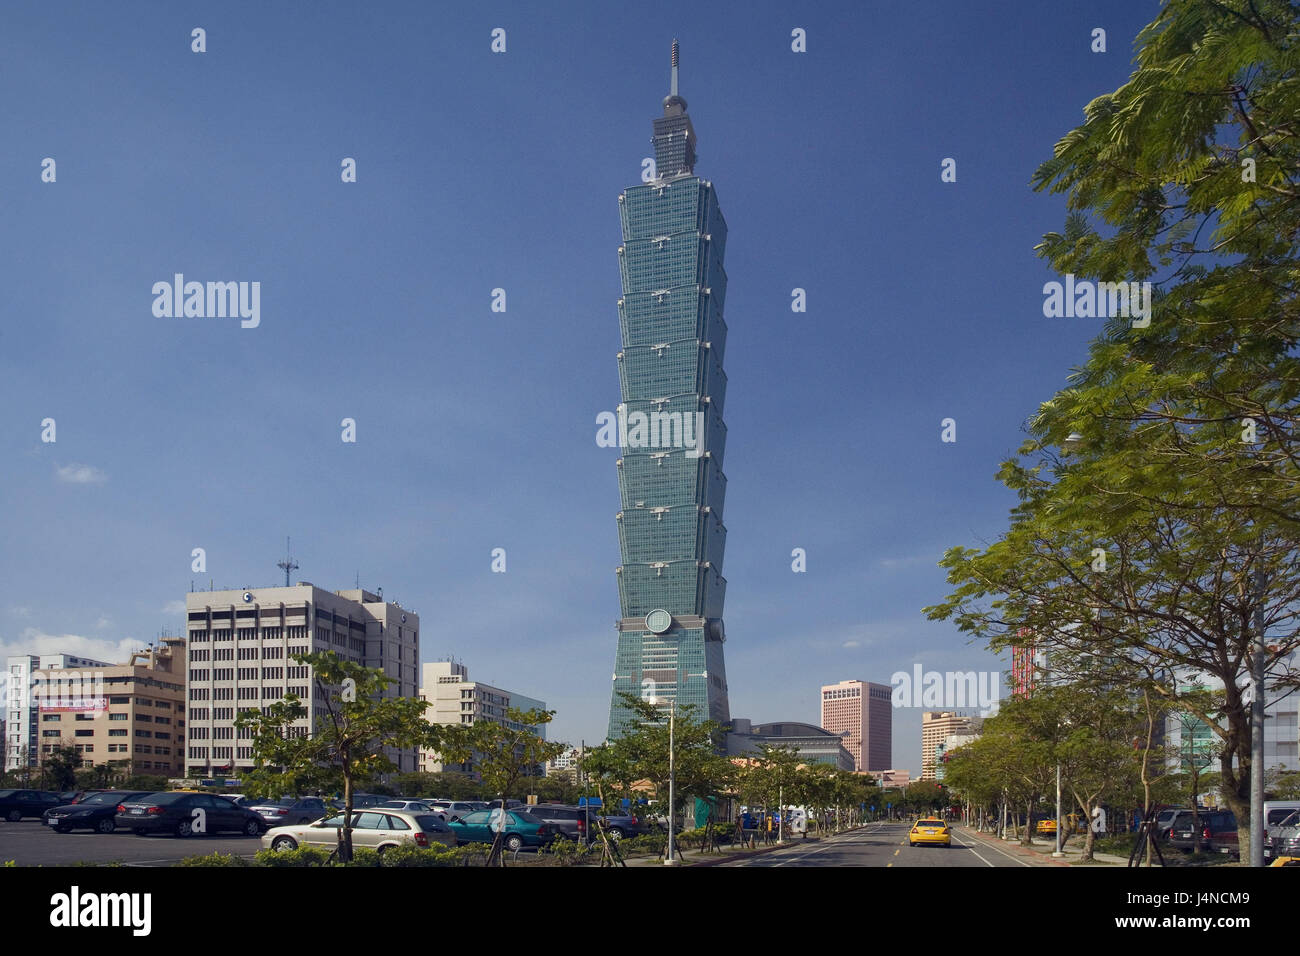 Taiwan, Taipeh, town view, Taipei Financial centre, no property release, Asia, Eastern Asia, town, capital, city, metropolis, building, skyscraper, high rise, architecture, Stock Photo